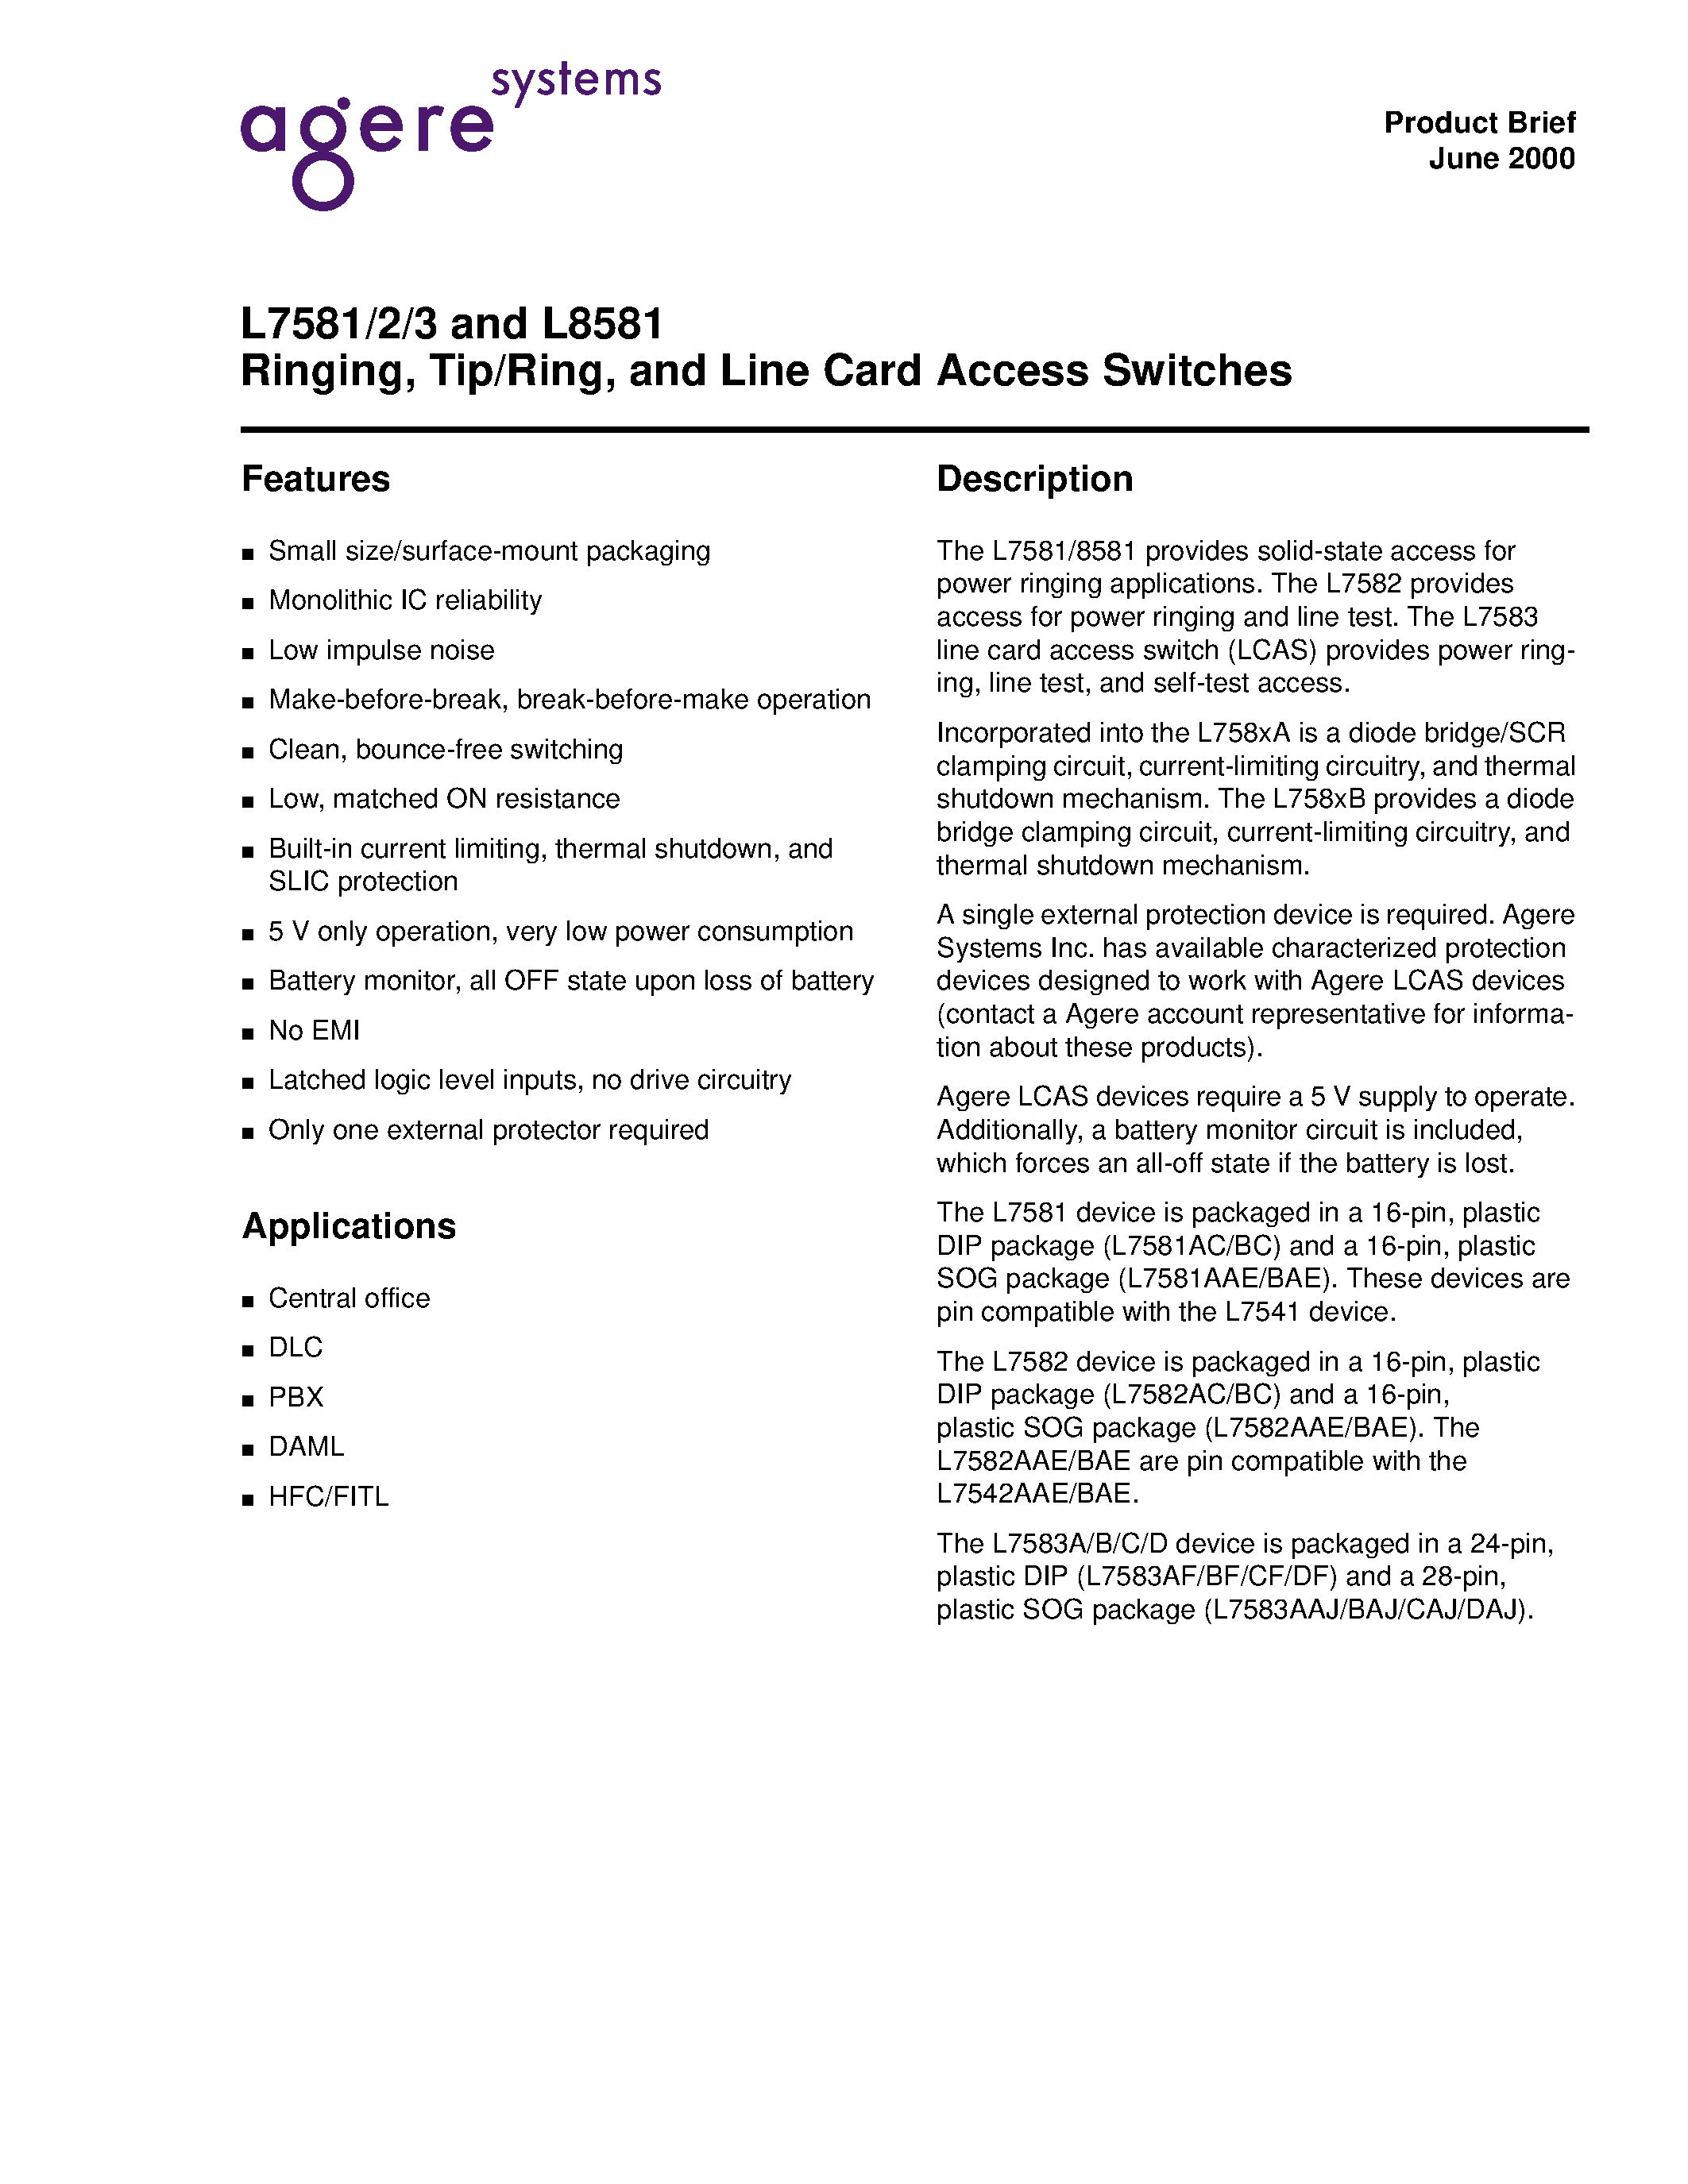 Даташит L7583 - Ringing / Tip/Ring and Line Card Access Switches страница 1